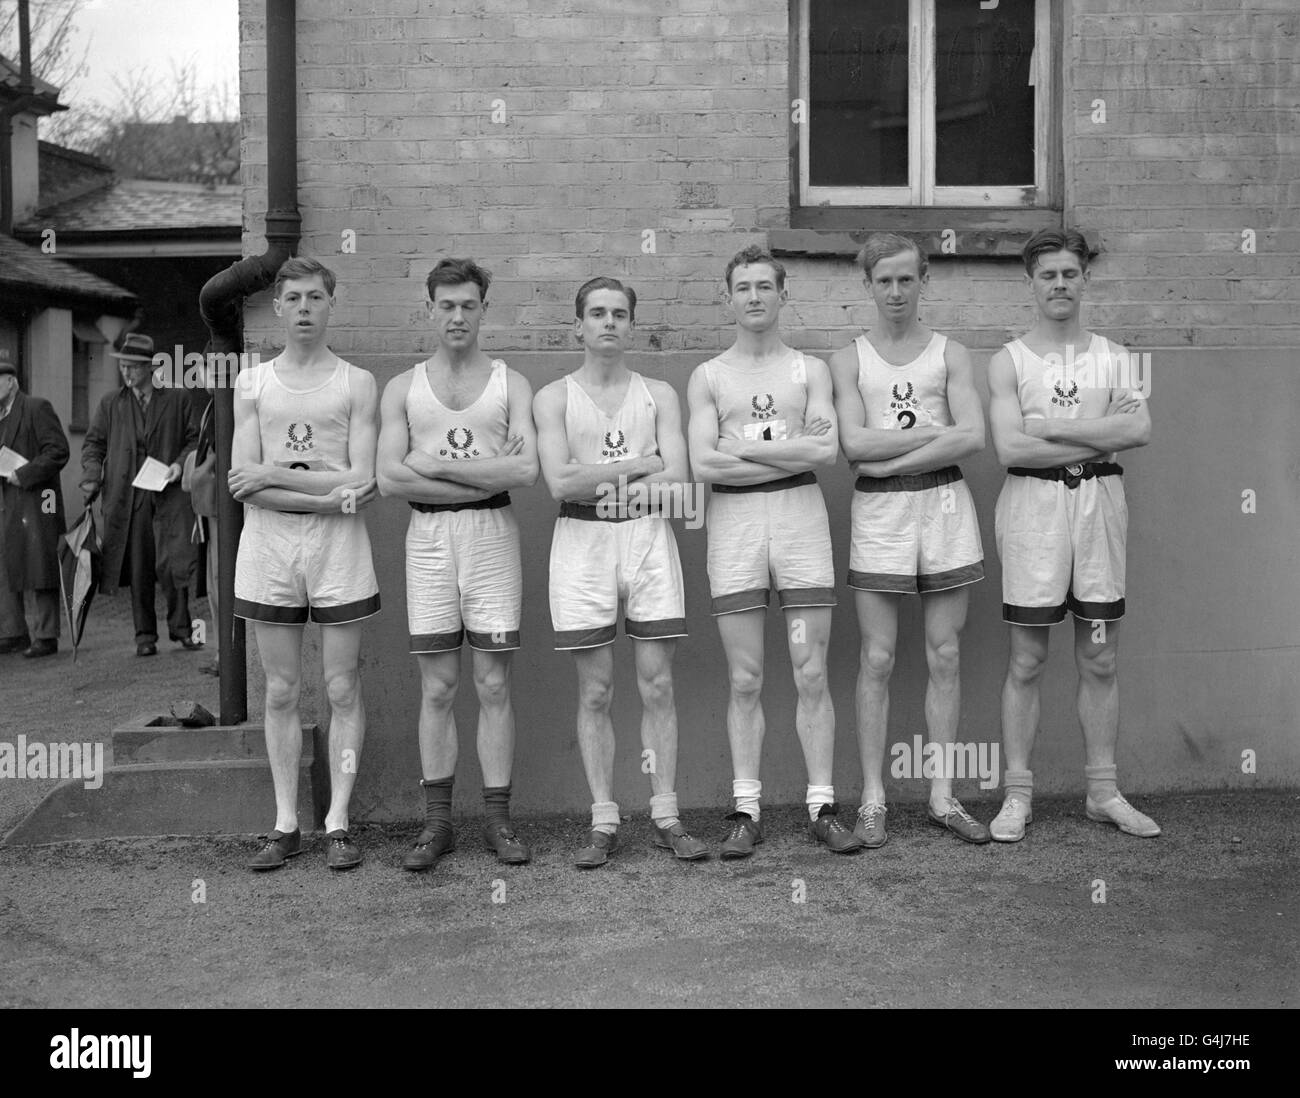 The Oxford team for the Oxford v Cambridge Inter-Varsity Cross-Country Race held on Wimbledon Common, London. From left to right: G D C Tudor (Captain); A F Trotman-Dickenson, T P E Curry, N M Green, J F Pollard and G Ridding. Oxford were the winning team. Stock Photo